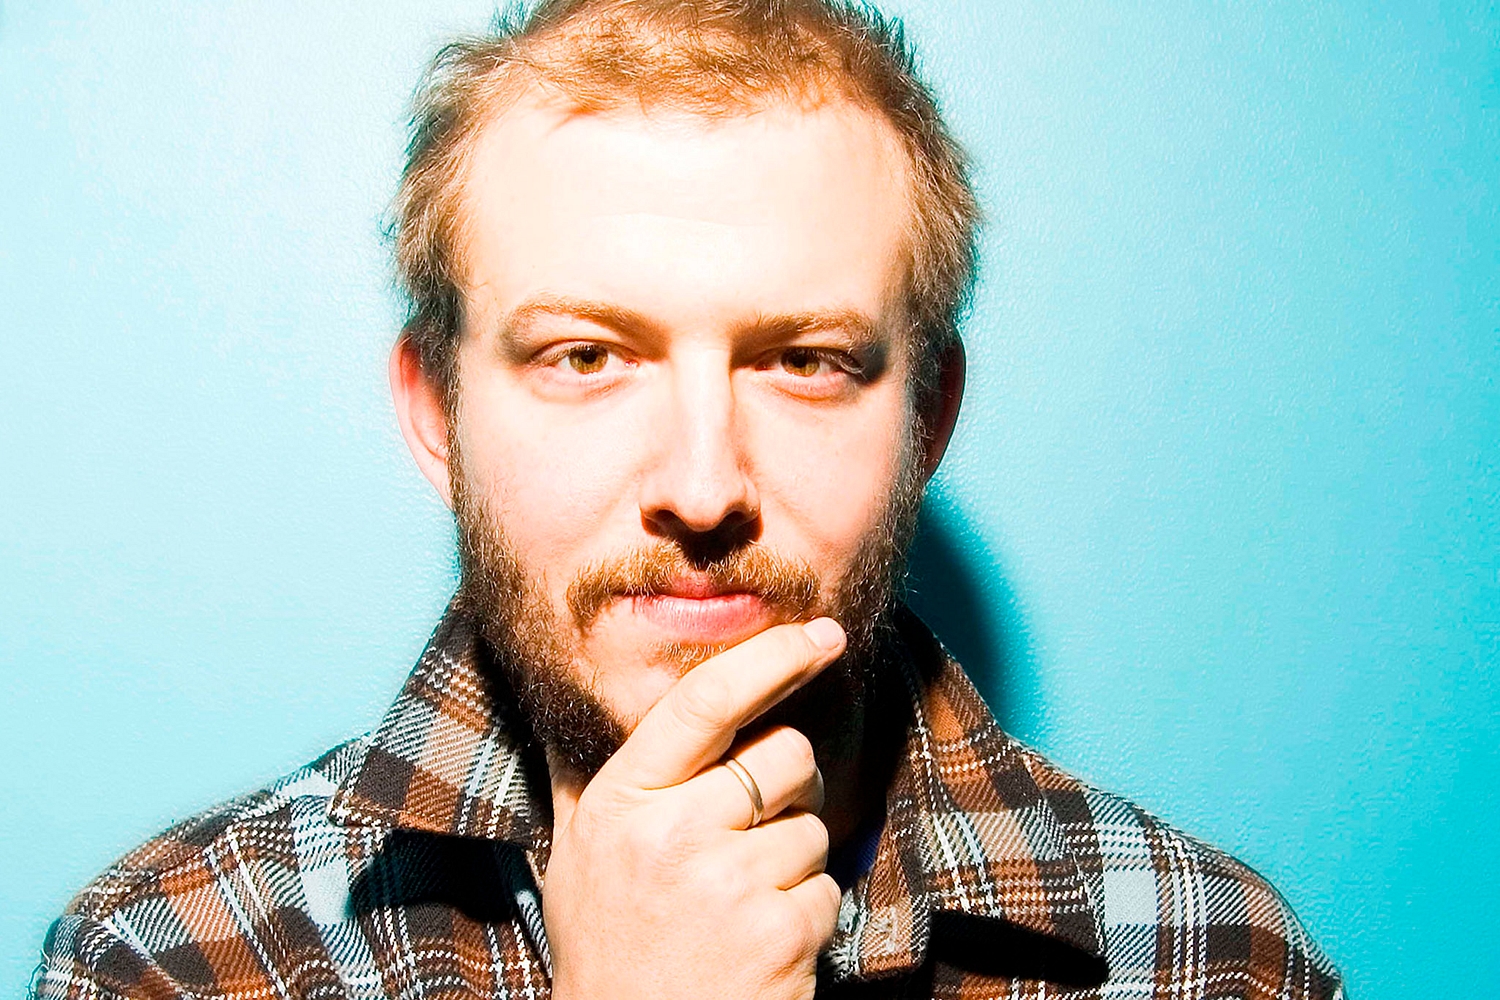 Bon Iver says he’s working with The Staves on new projects